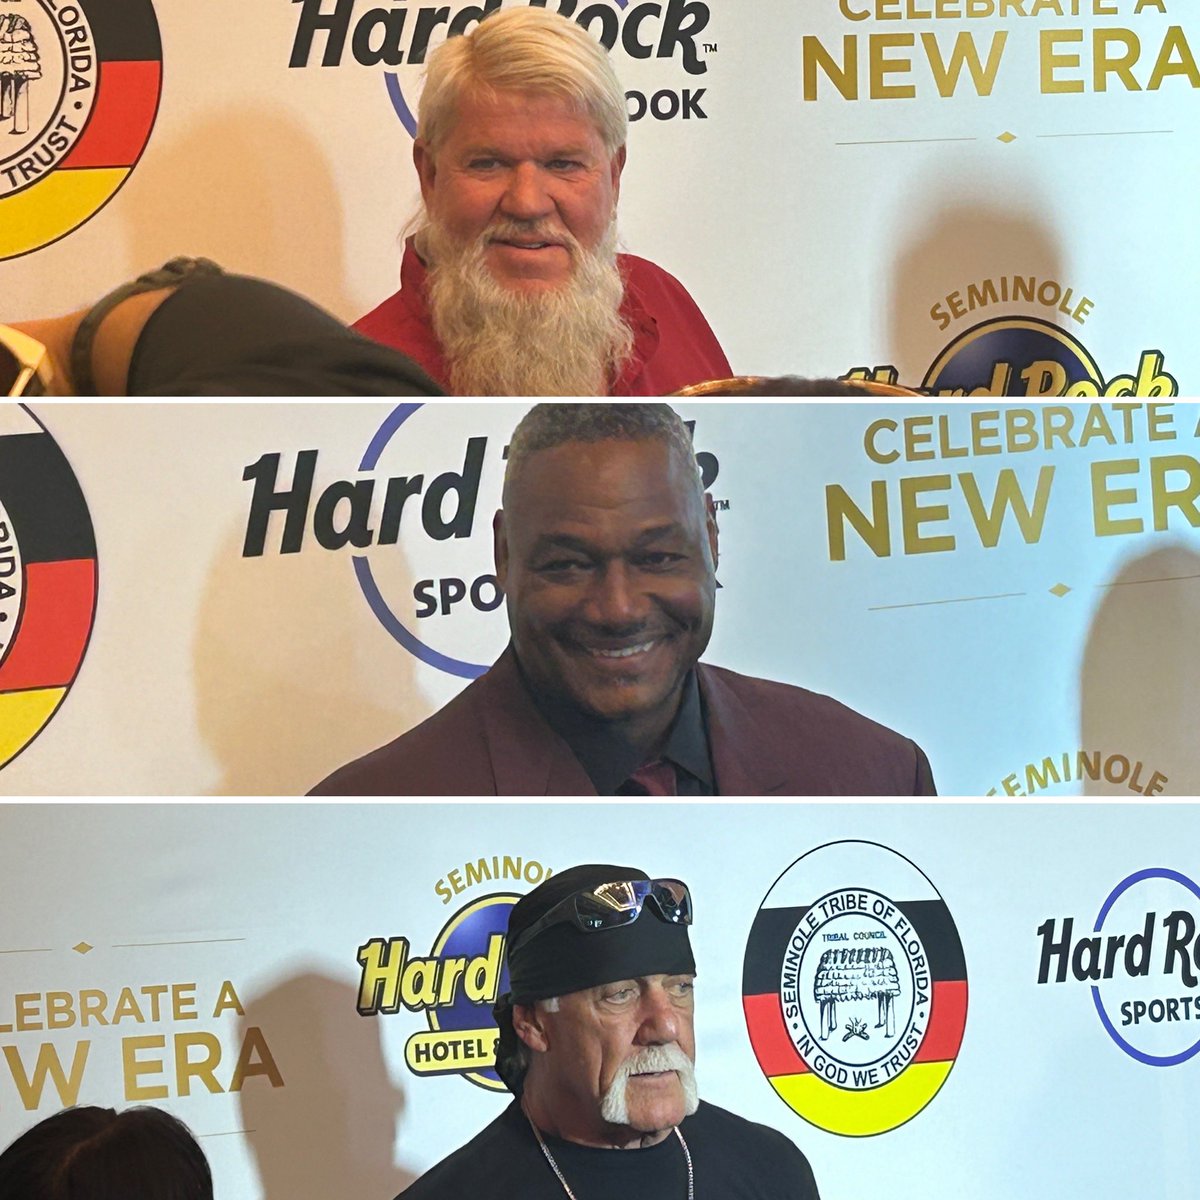 The stars are out at #HardRockTampa John Daly, Derrick Brooks and Hulk Hogan on the #HardRockRedCarpet All to welcome Craps, roulette and the Hard Rock Bet app. Come out and celebrate #aneweraofseminolegaming #Sponsored #iHeartPartner